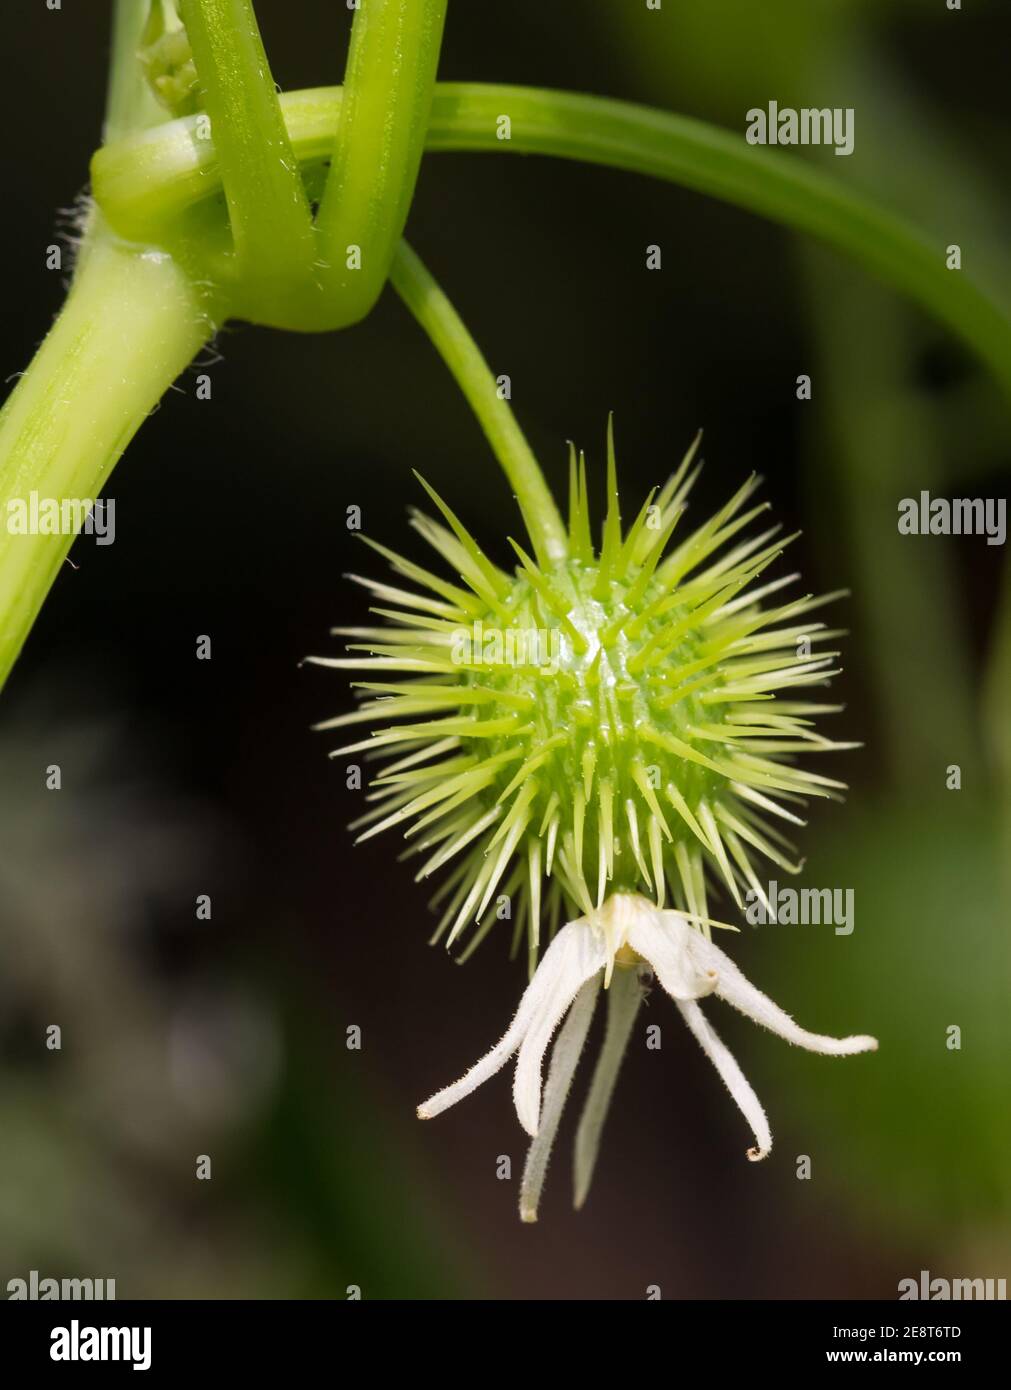 White flower and young fruit of wild cucumber or Echinocystis lobata close up with blurred selective focus background Stock Photo